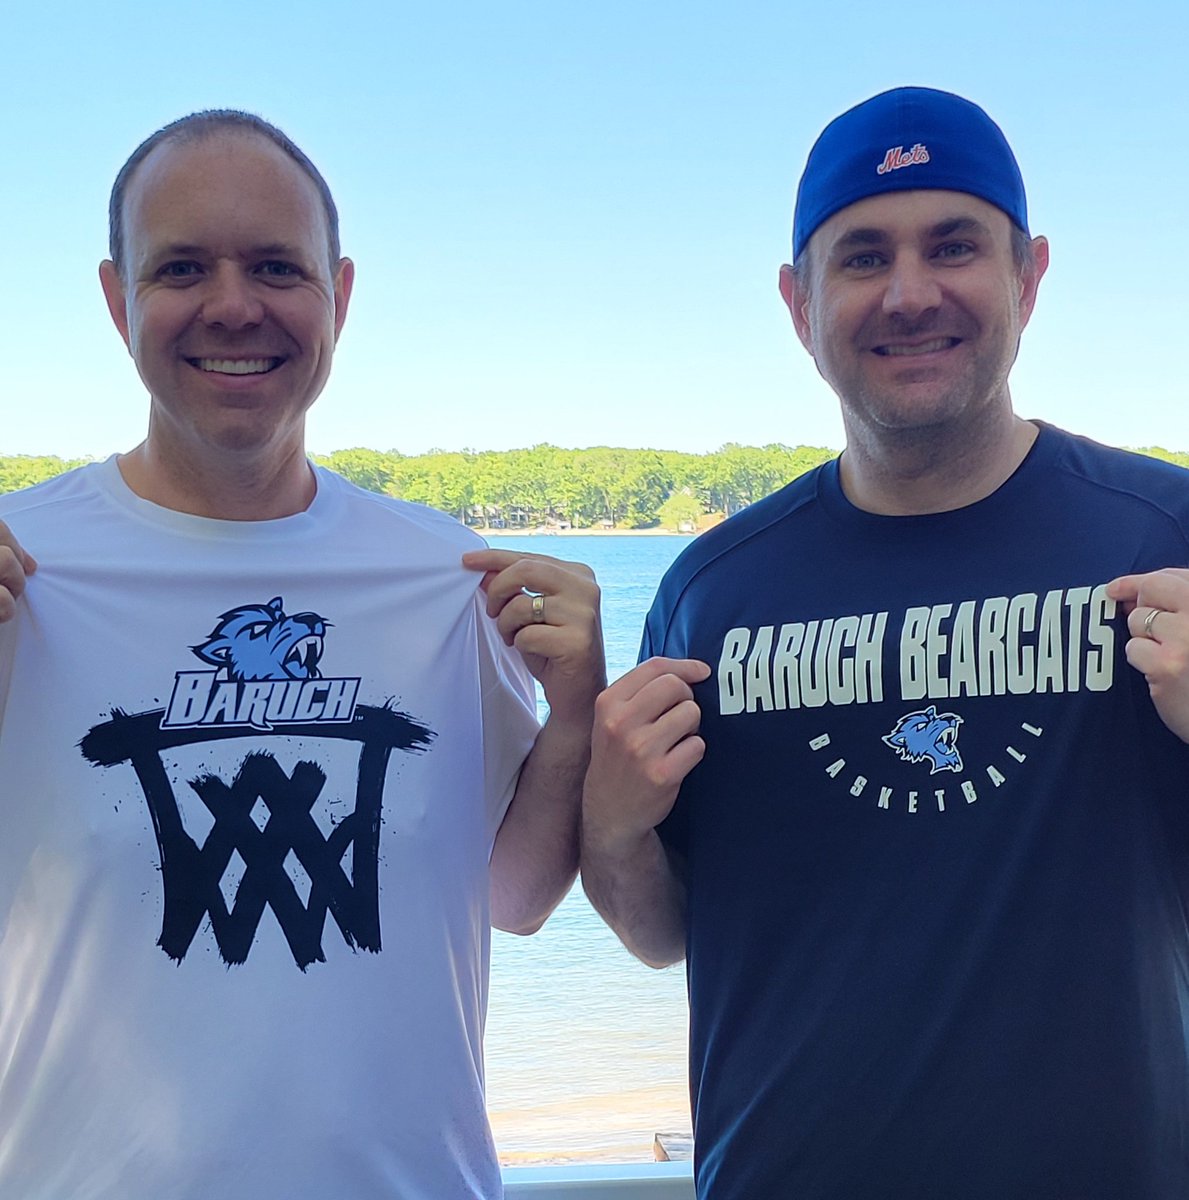 Repping @BaruchHoops this holiday weekend. Thanks for the offseason care package!
#d3hoops